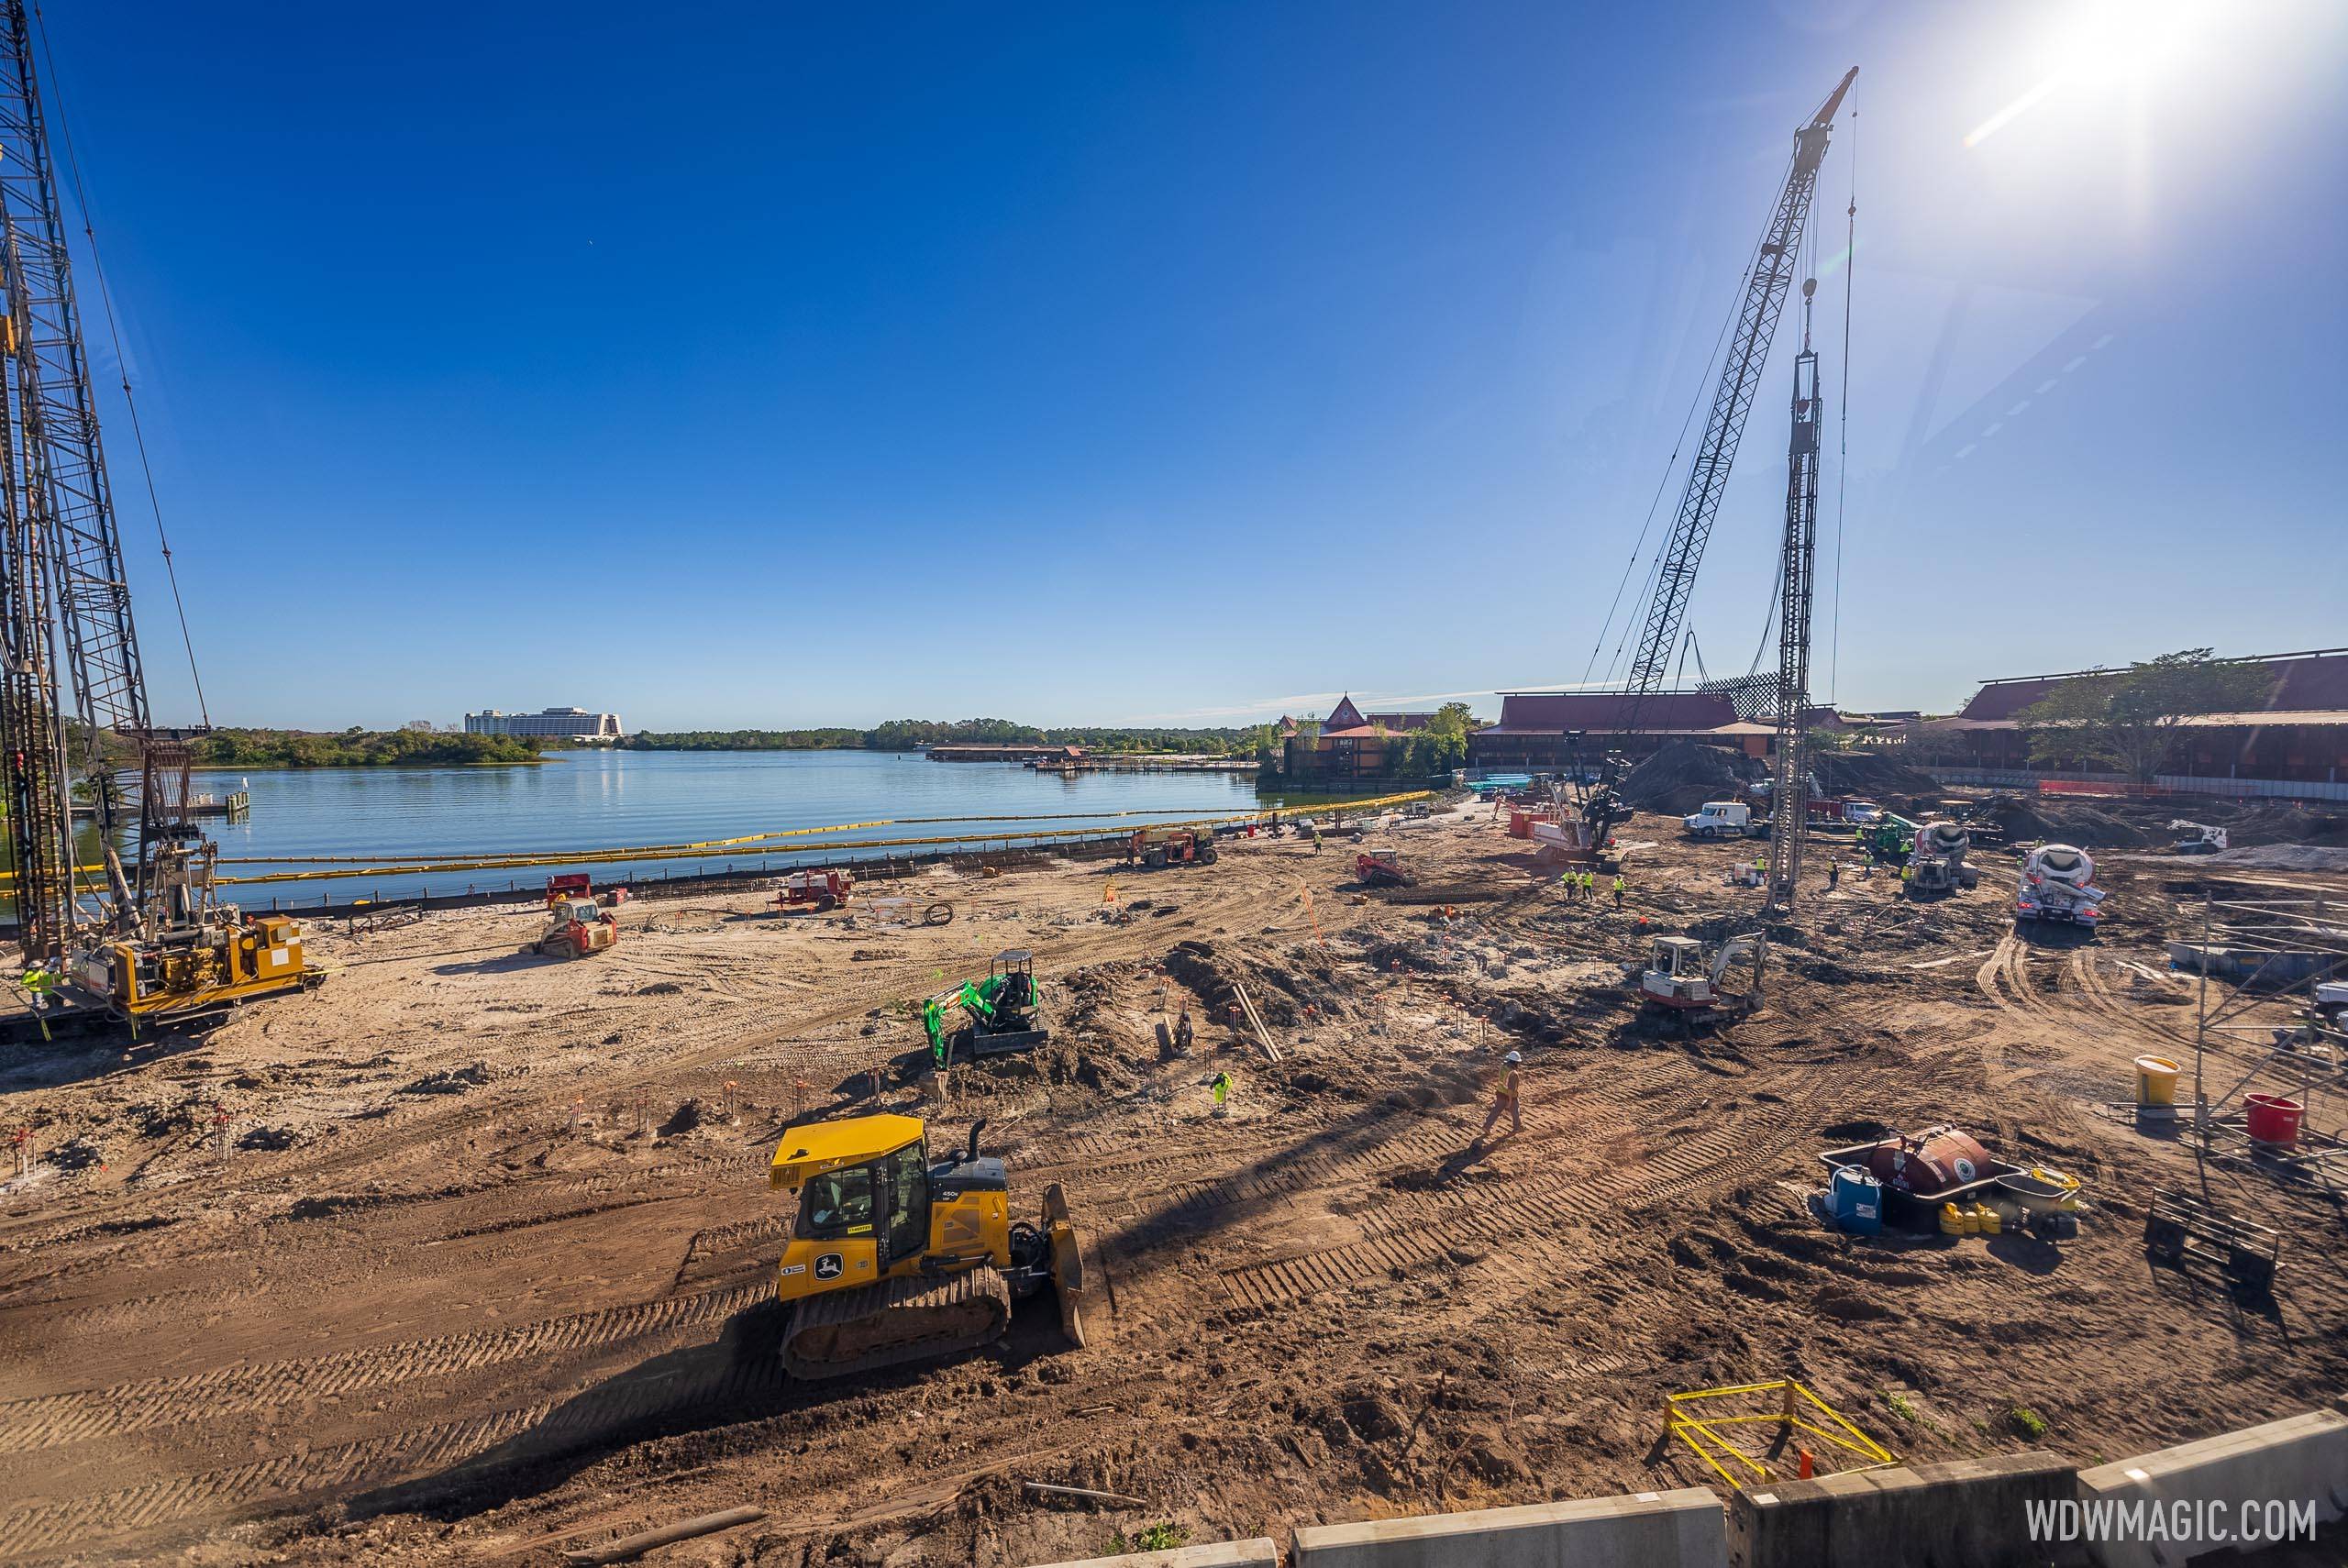 Construction update from the new Disney Vacation Club tower at Disney's Polynesian Village Resort